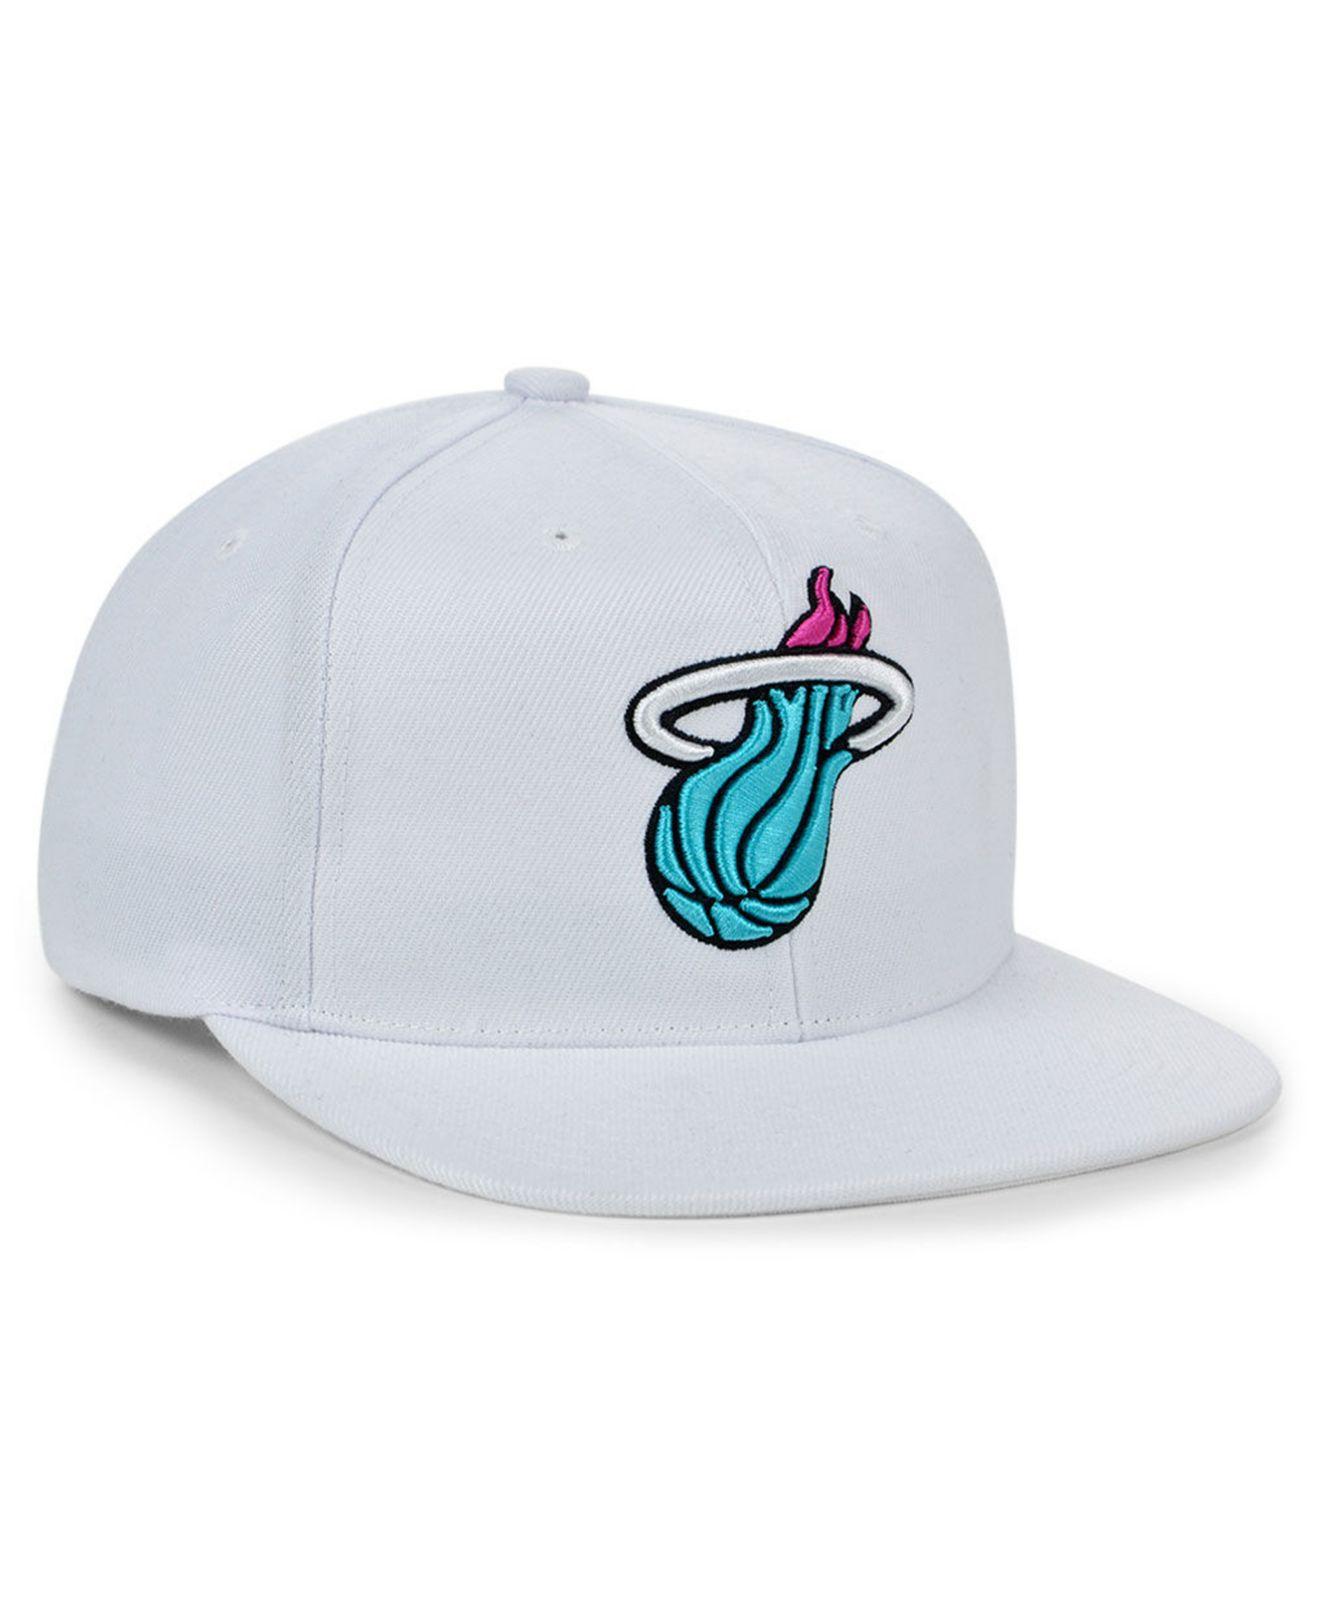 mitchell and ness heat hat